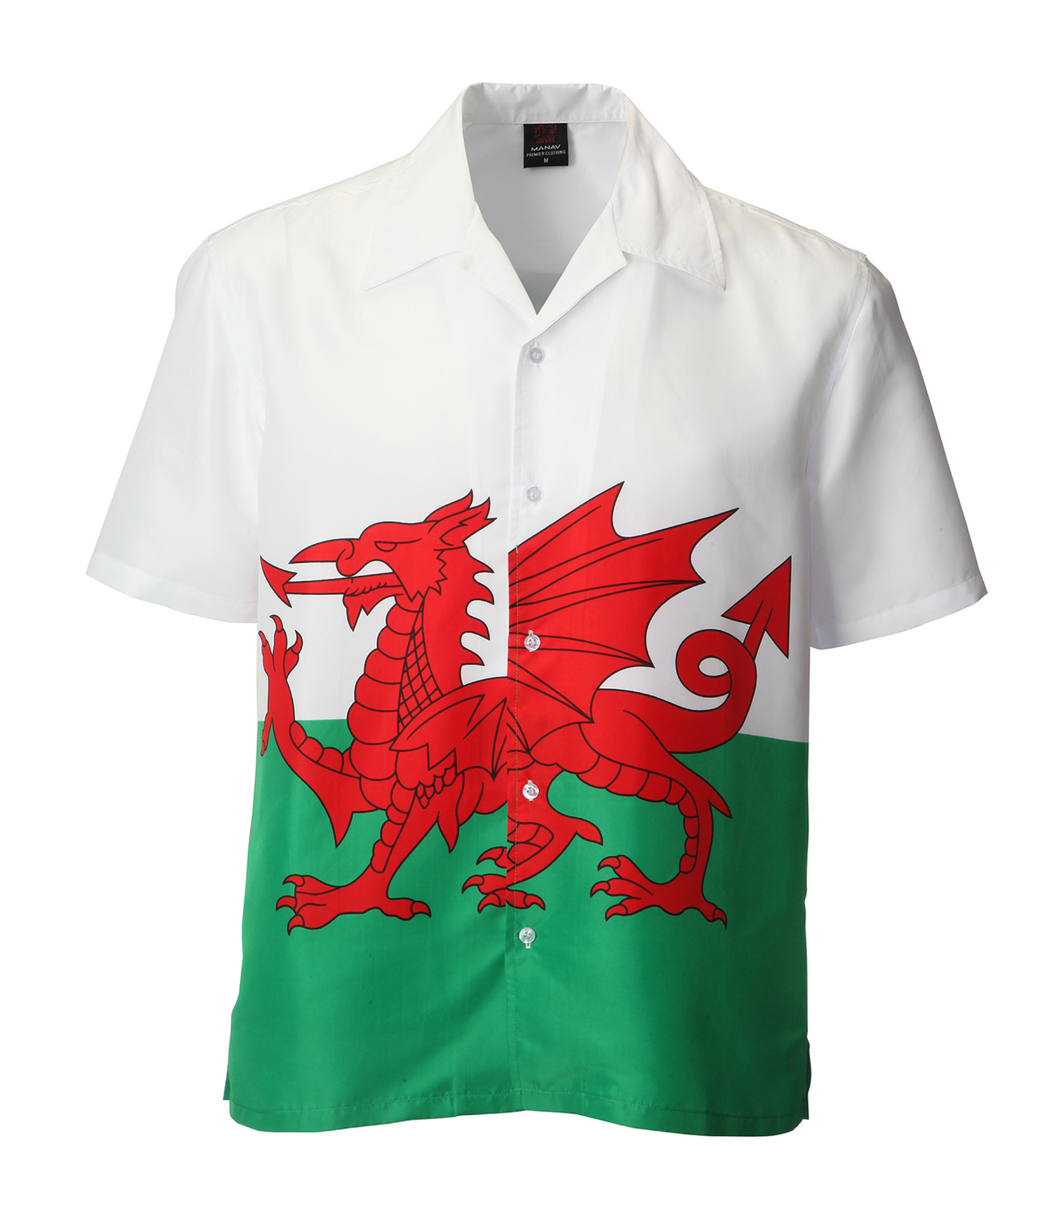 Wales Welsh Flag Buttoned Shirt